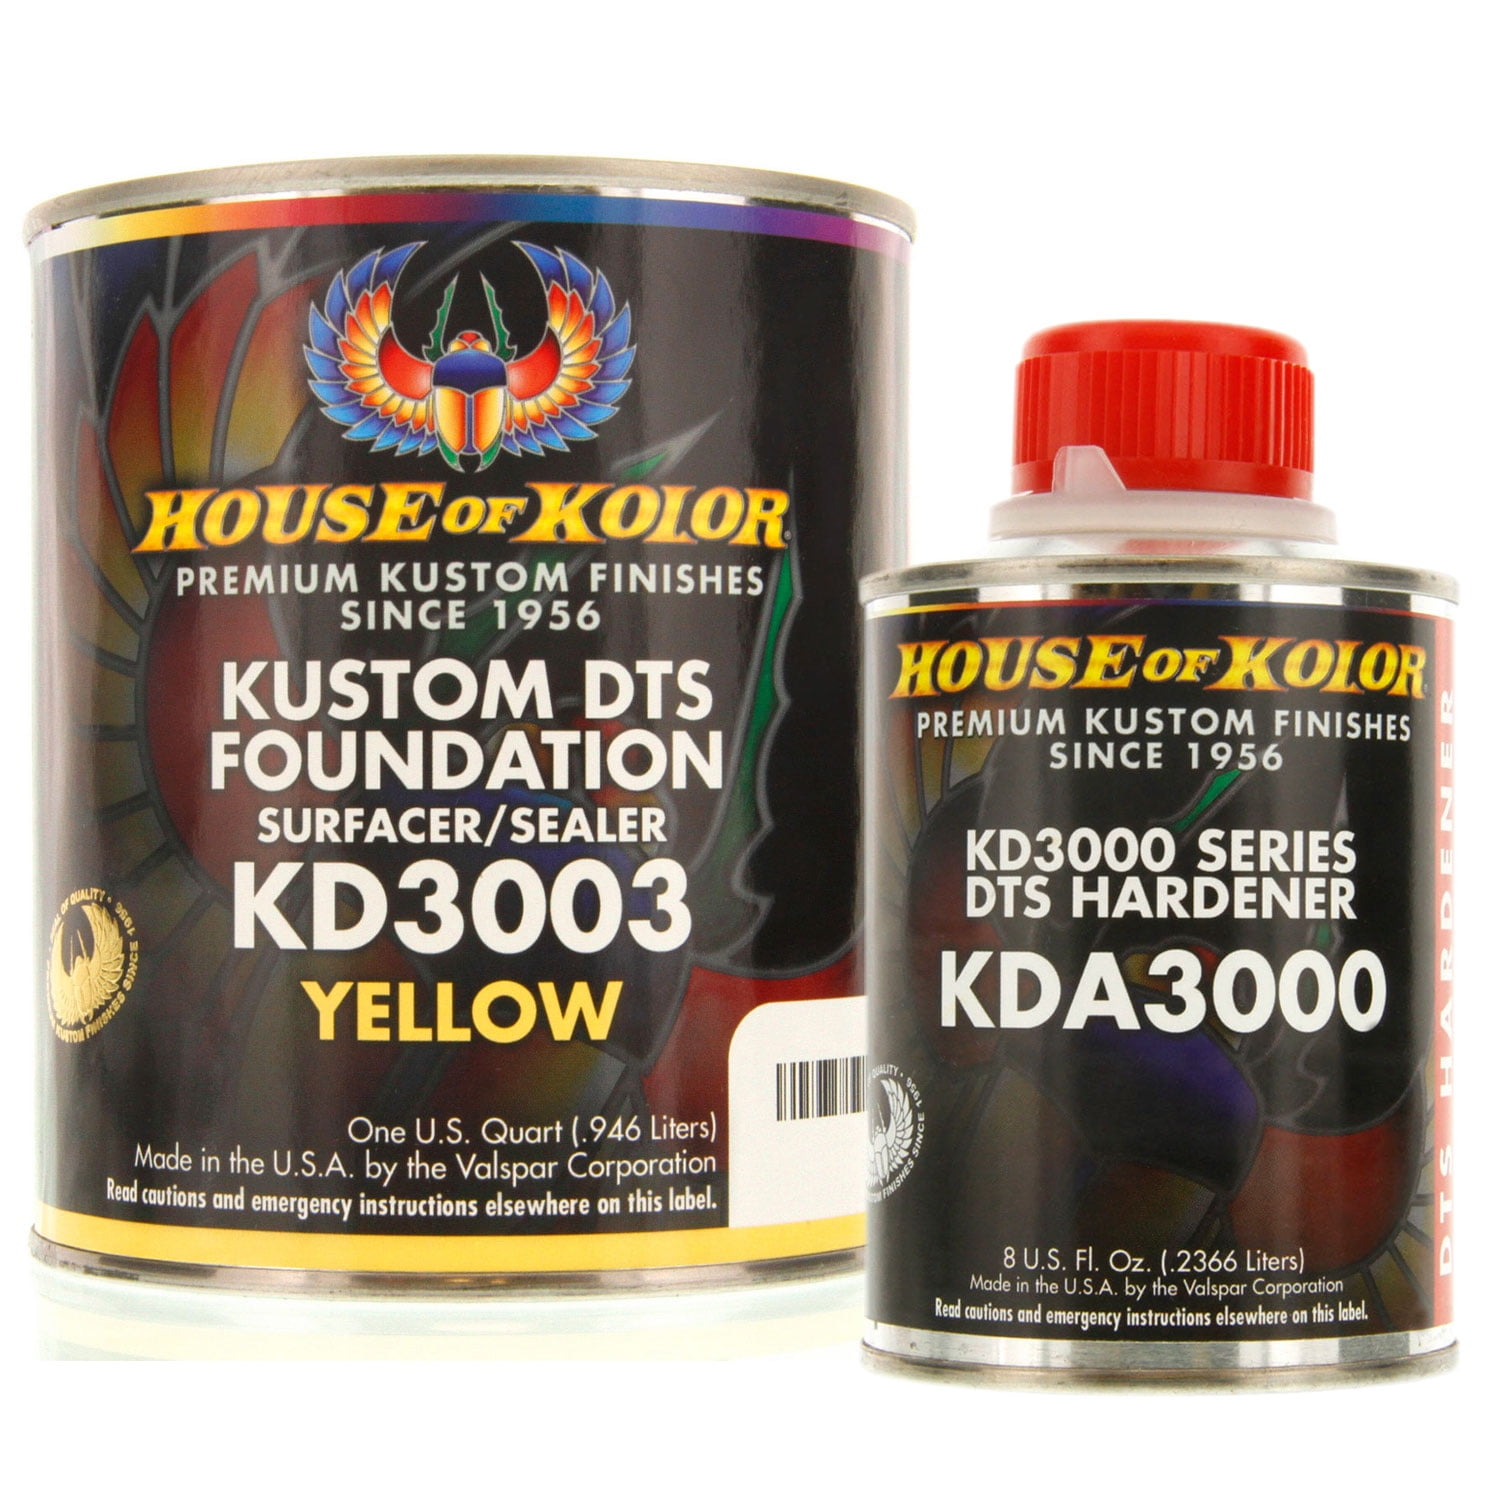 Liquid Stainless Steel Range and Dishwasher Makeover Paint Kit 